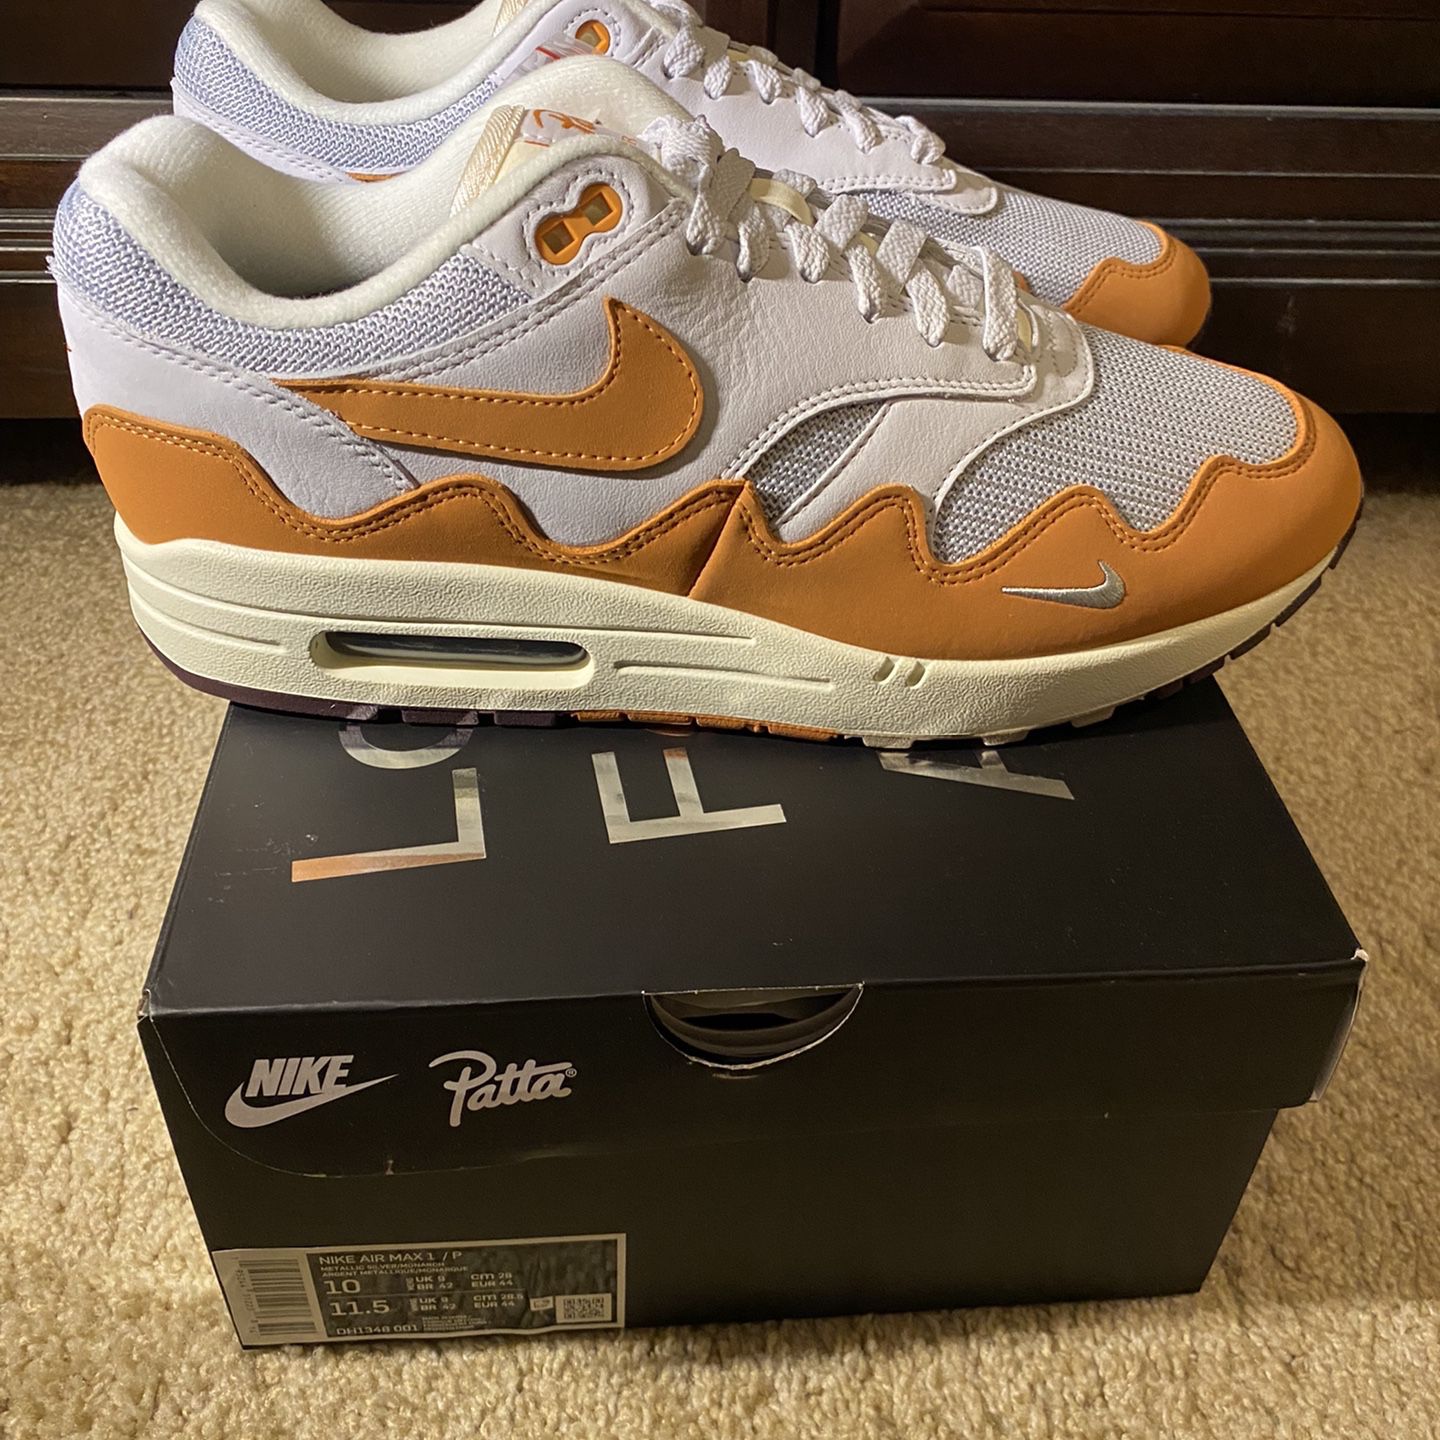 Nike X Patta Air Max 1 Waves Monarch Special Box DH1348-001SP from